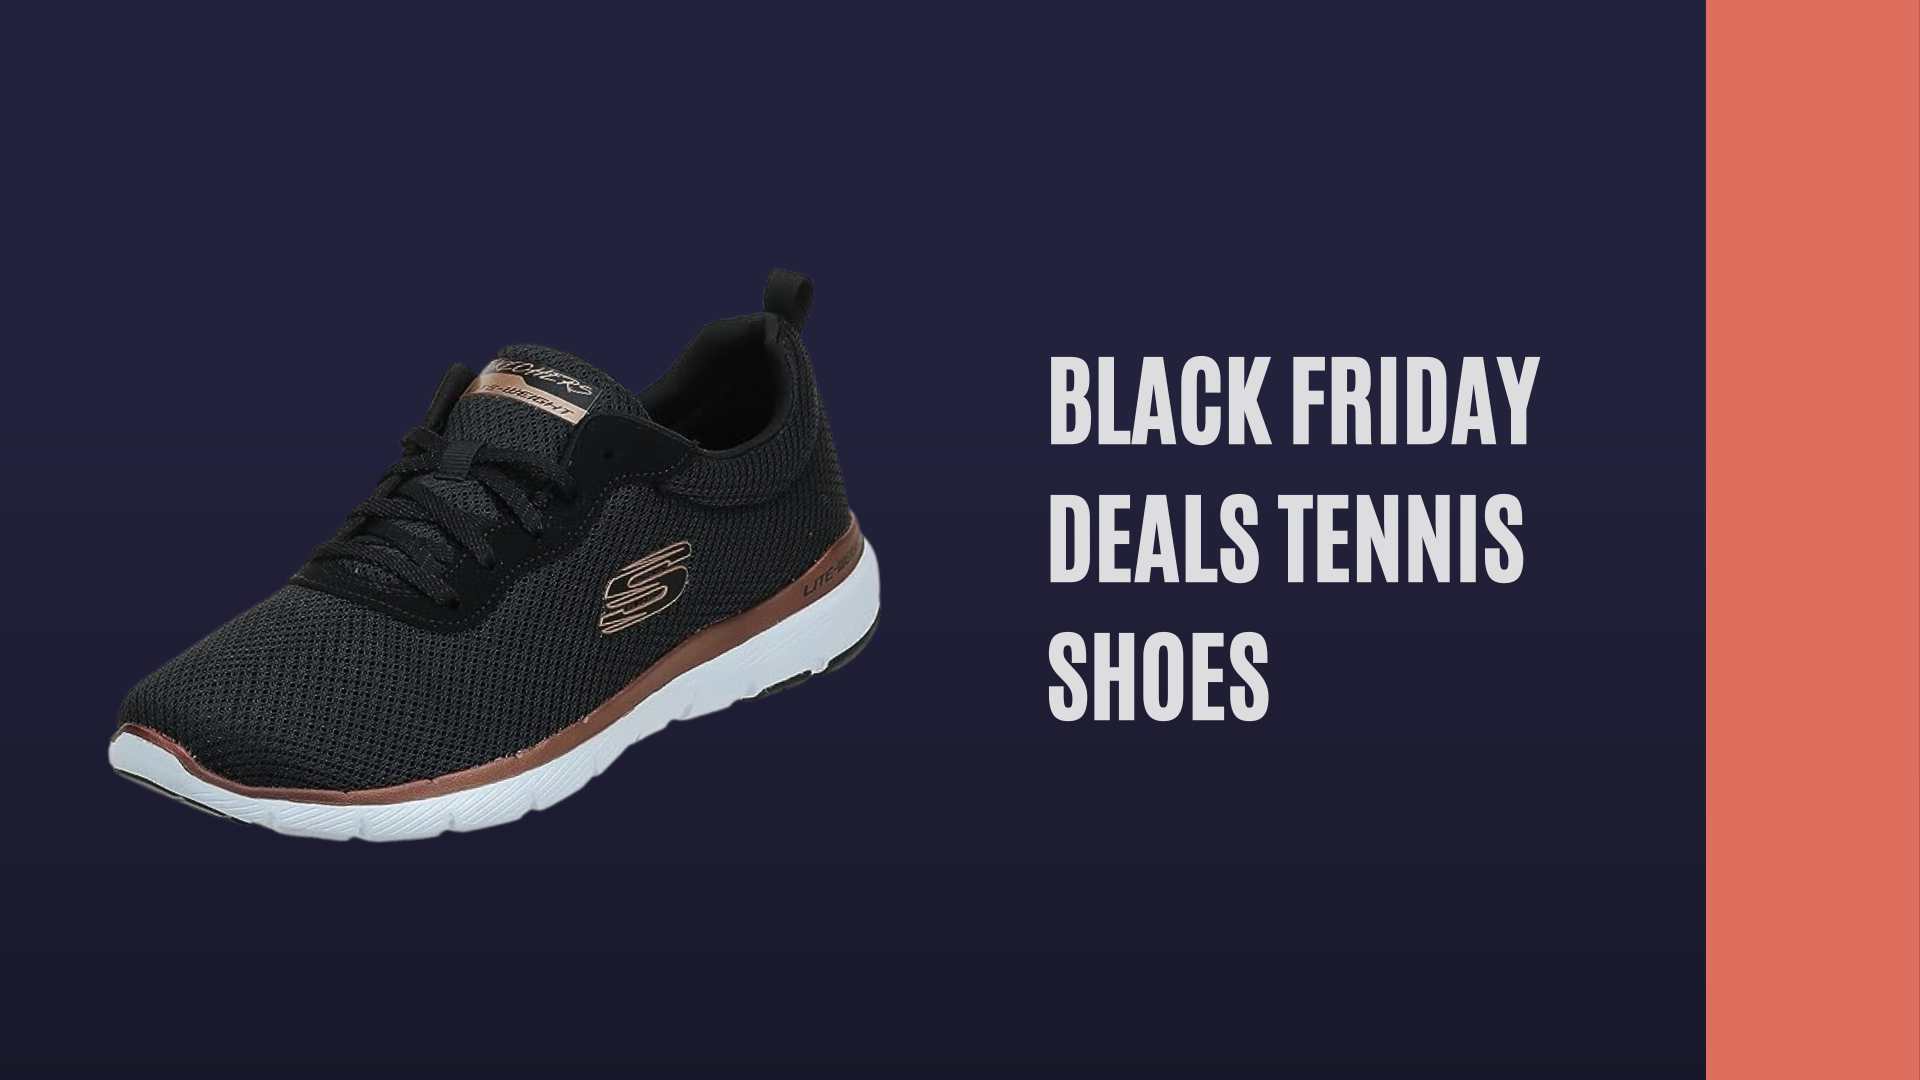 Black Friday Deals Tennis Shoes: Step Up Your Game with Unbeatable Savings!